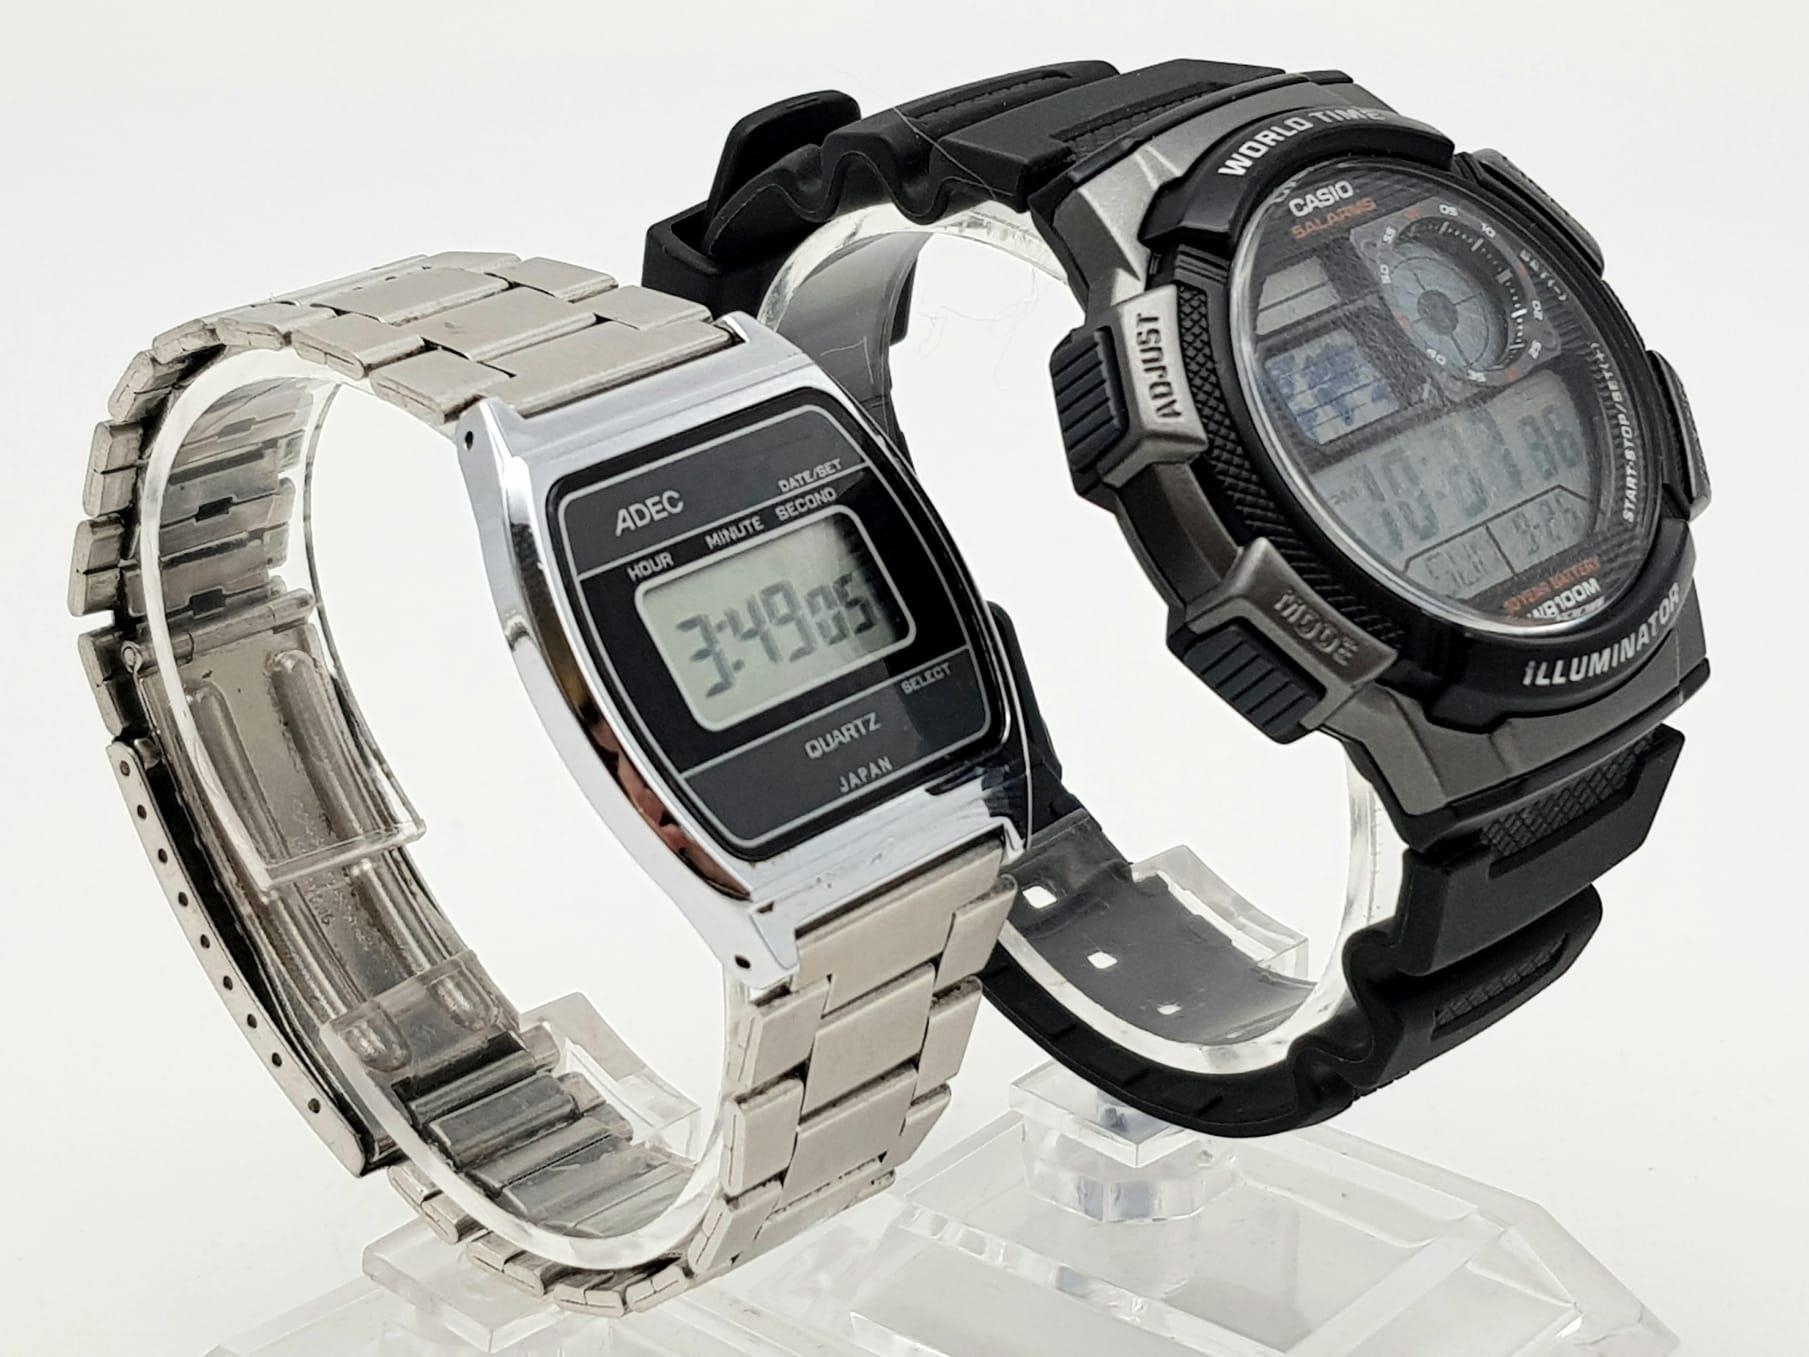 Two Digital Watches. A Casio and an Adec. Both in working order. - Image 2 of 5